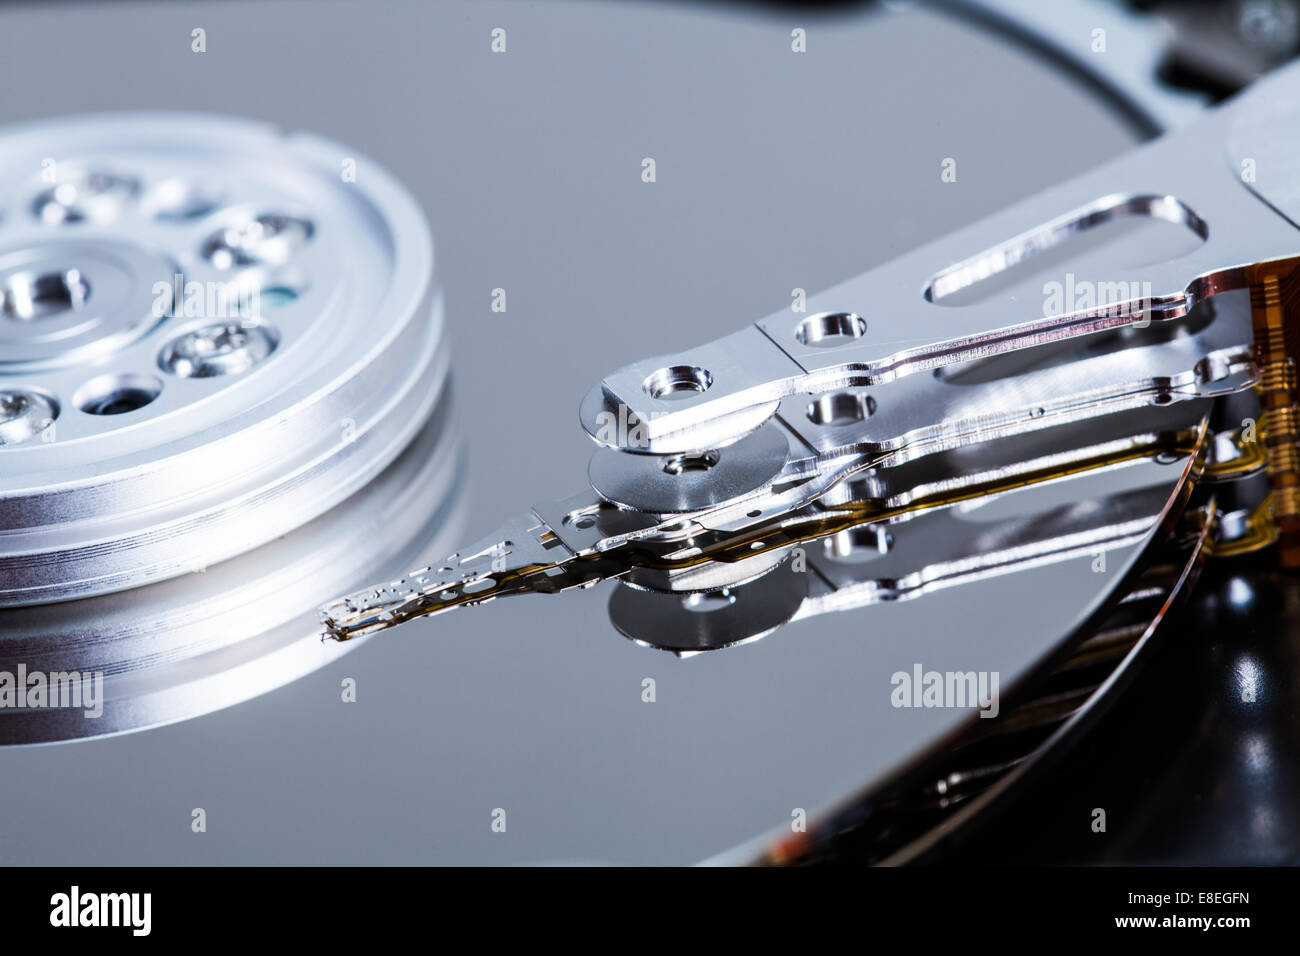 Hard Drive Mechanism and Details of the Platters, Arm and Spindle. Stock Photo